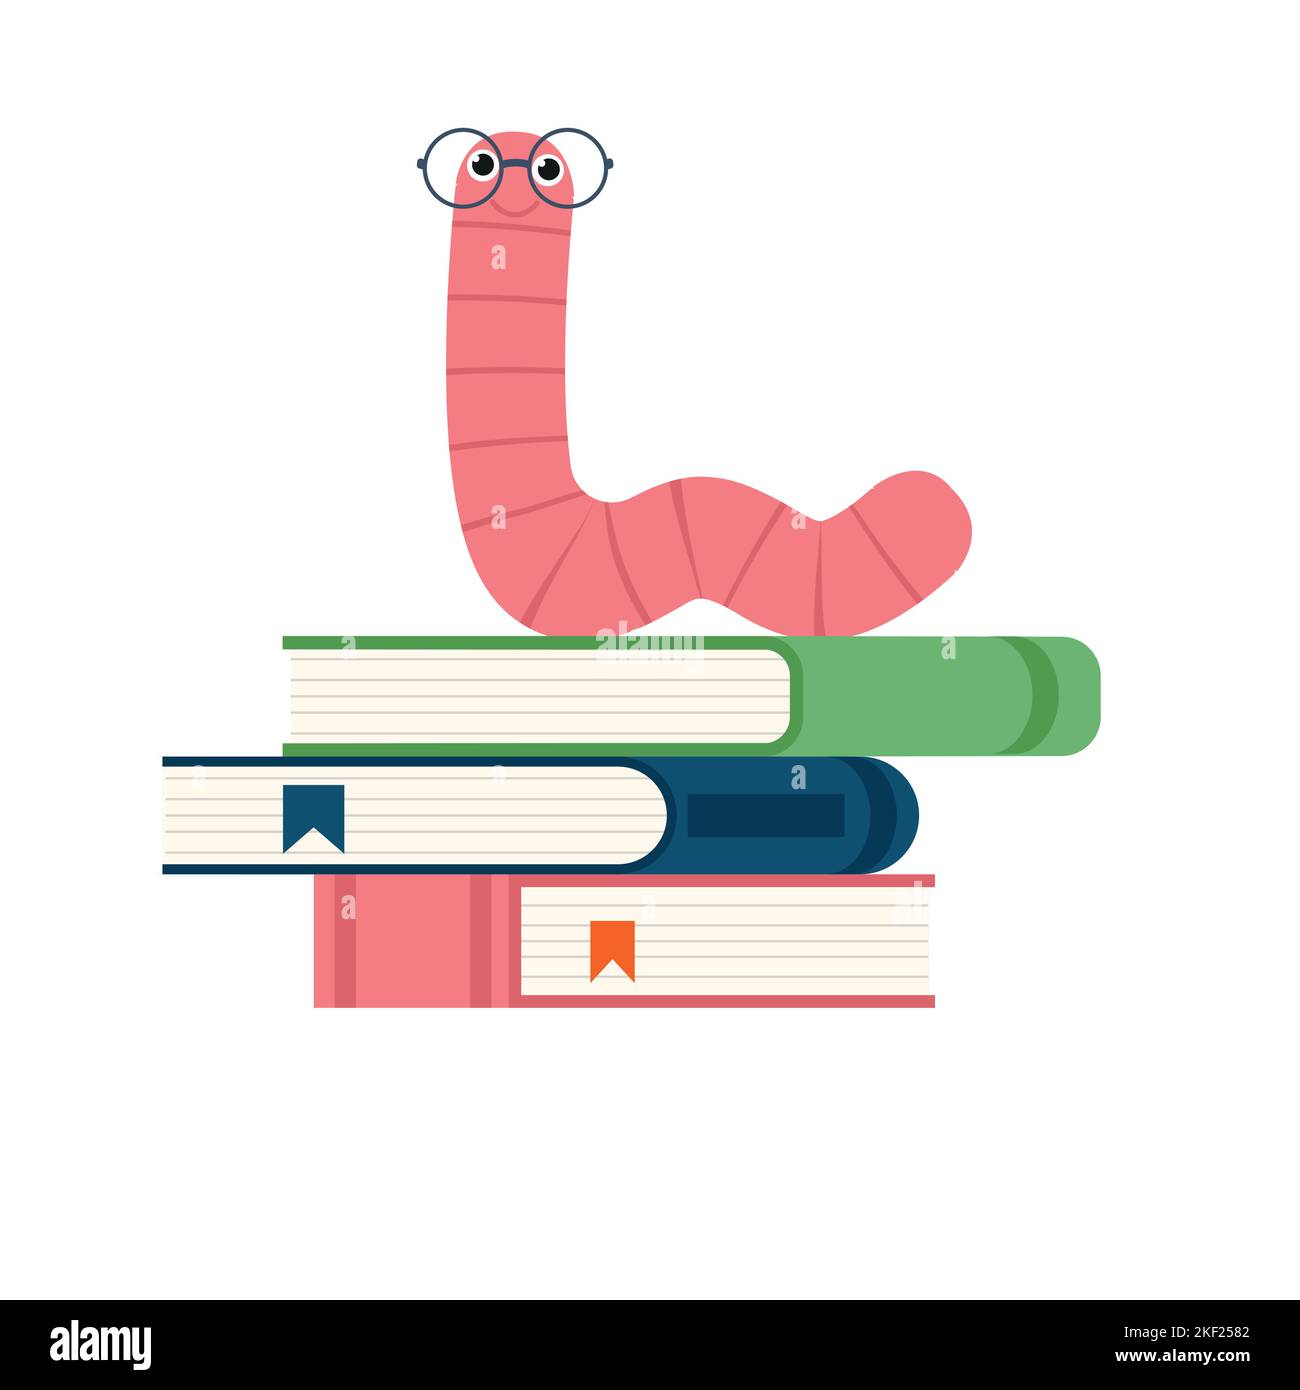 A cute caterpillar bookworm worm cute cartoon character education mascot wearing graduation hat and glasses reading a book eps 10 Stock Vector